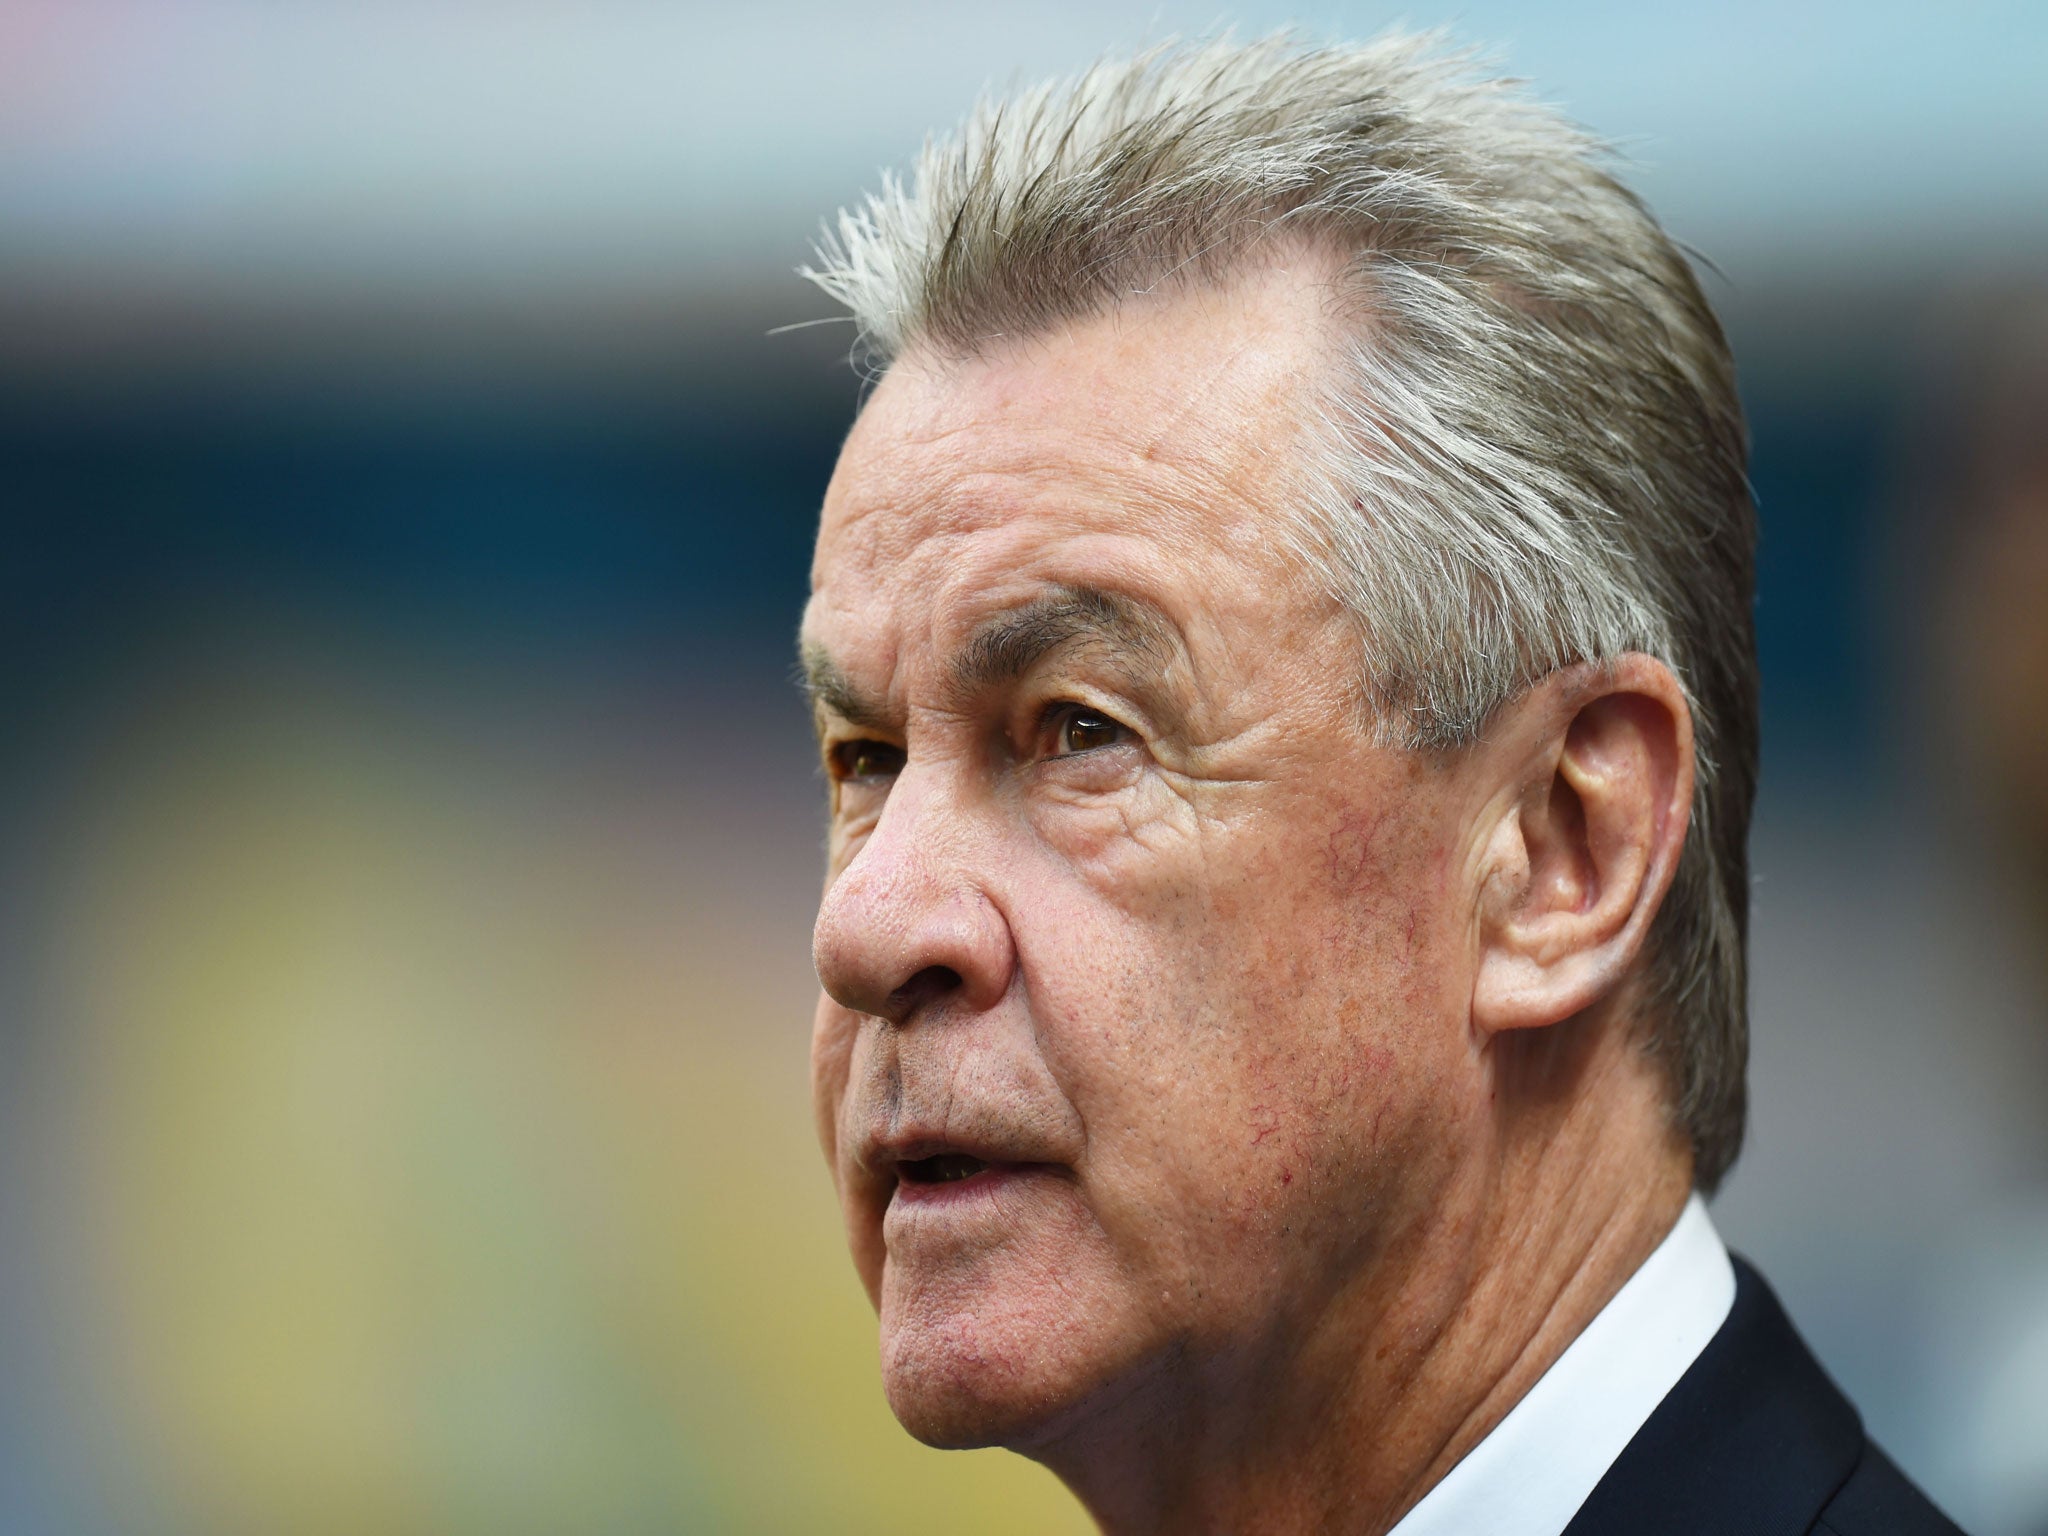 Ottmar Hitzfeld, coach of Switzerland, learned of his brother's passing on Monday night